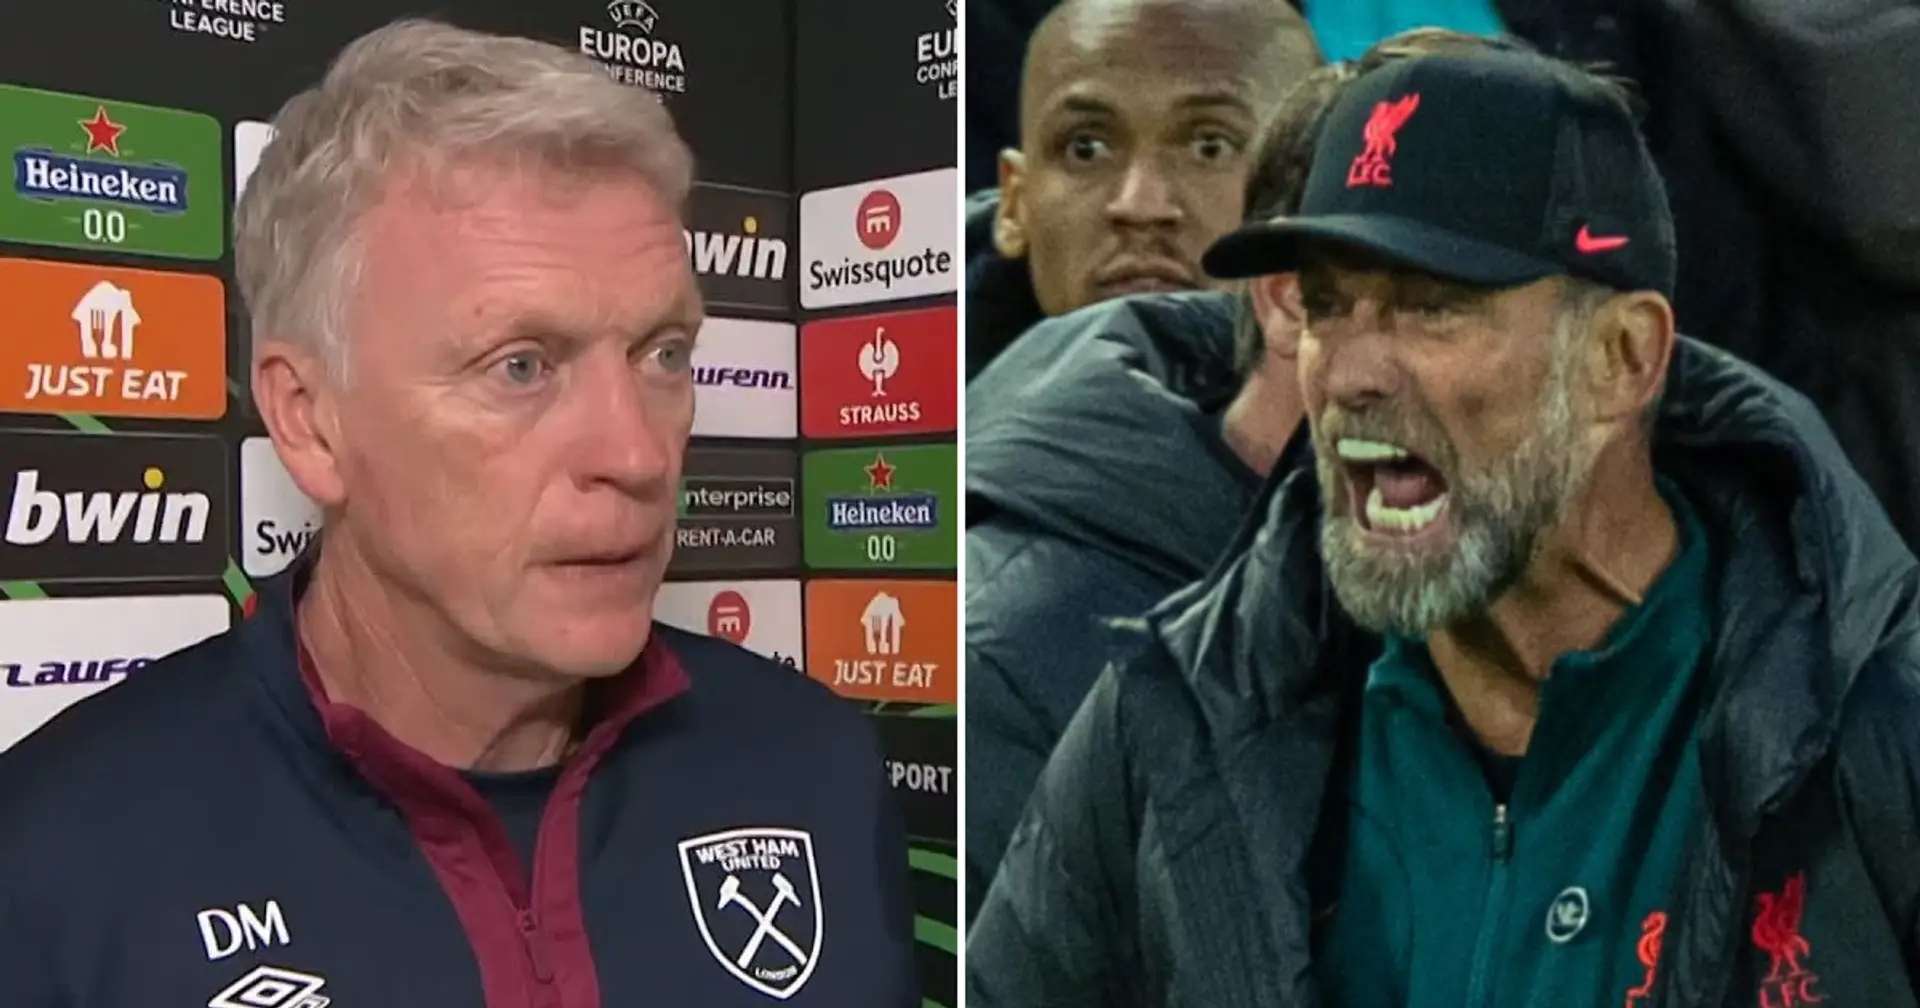 'He was correct, wasn't he?': Moyes sides with Klopp over touchline outburst in City game